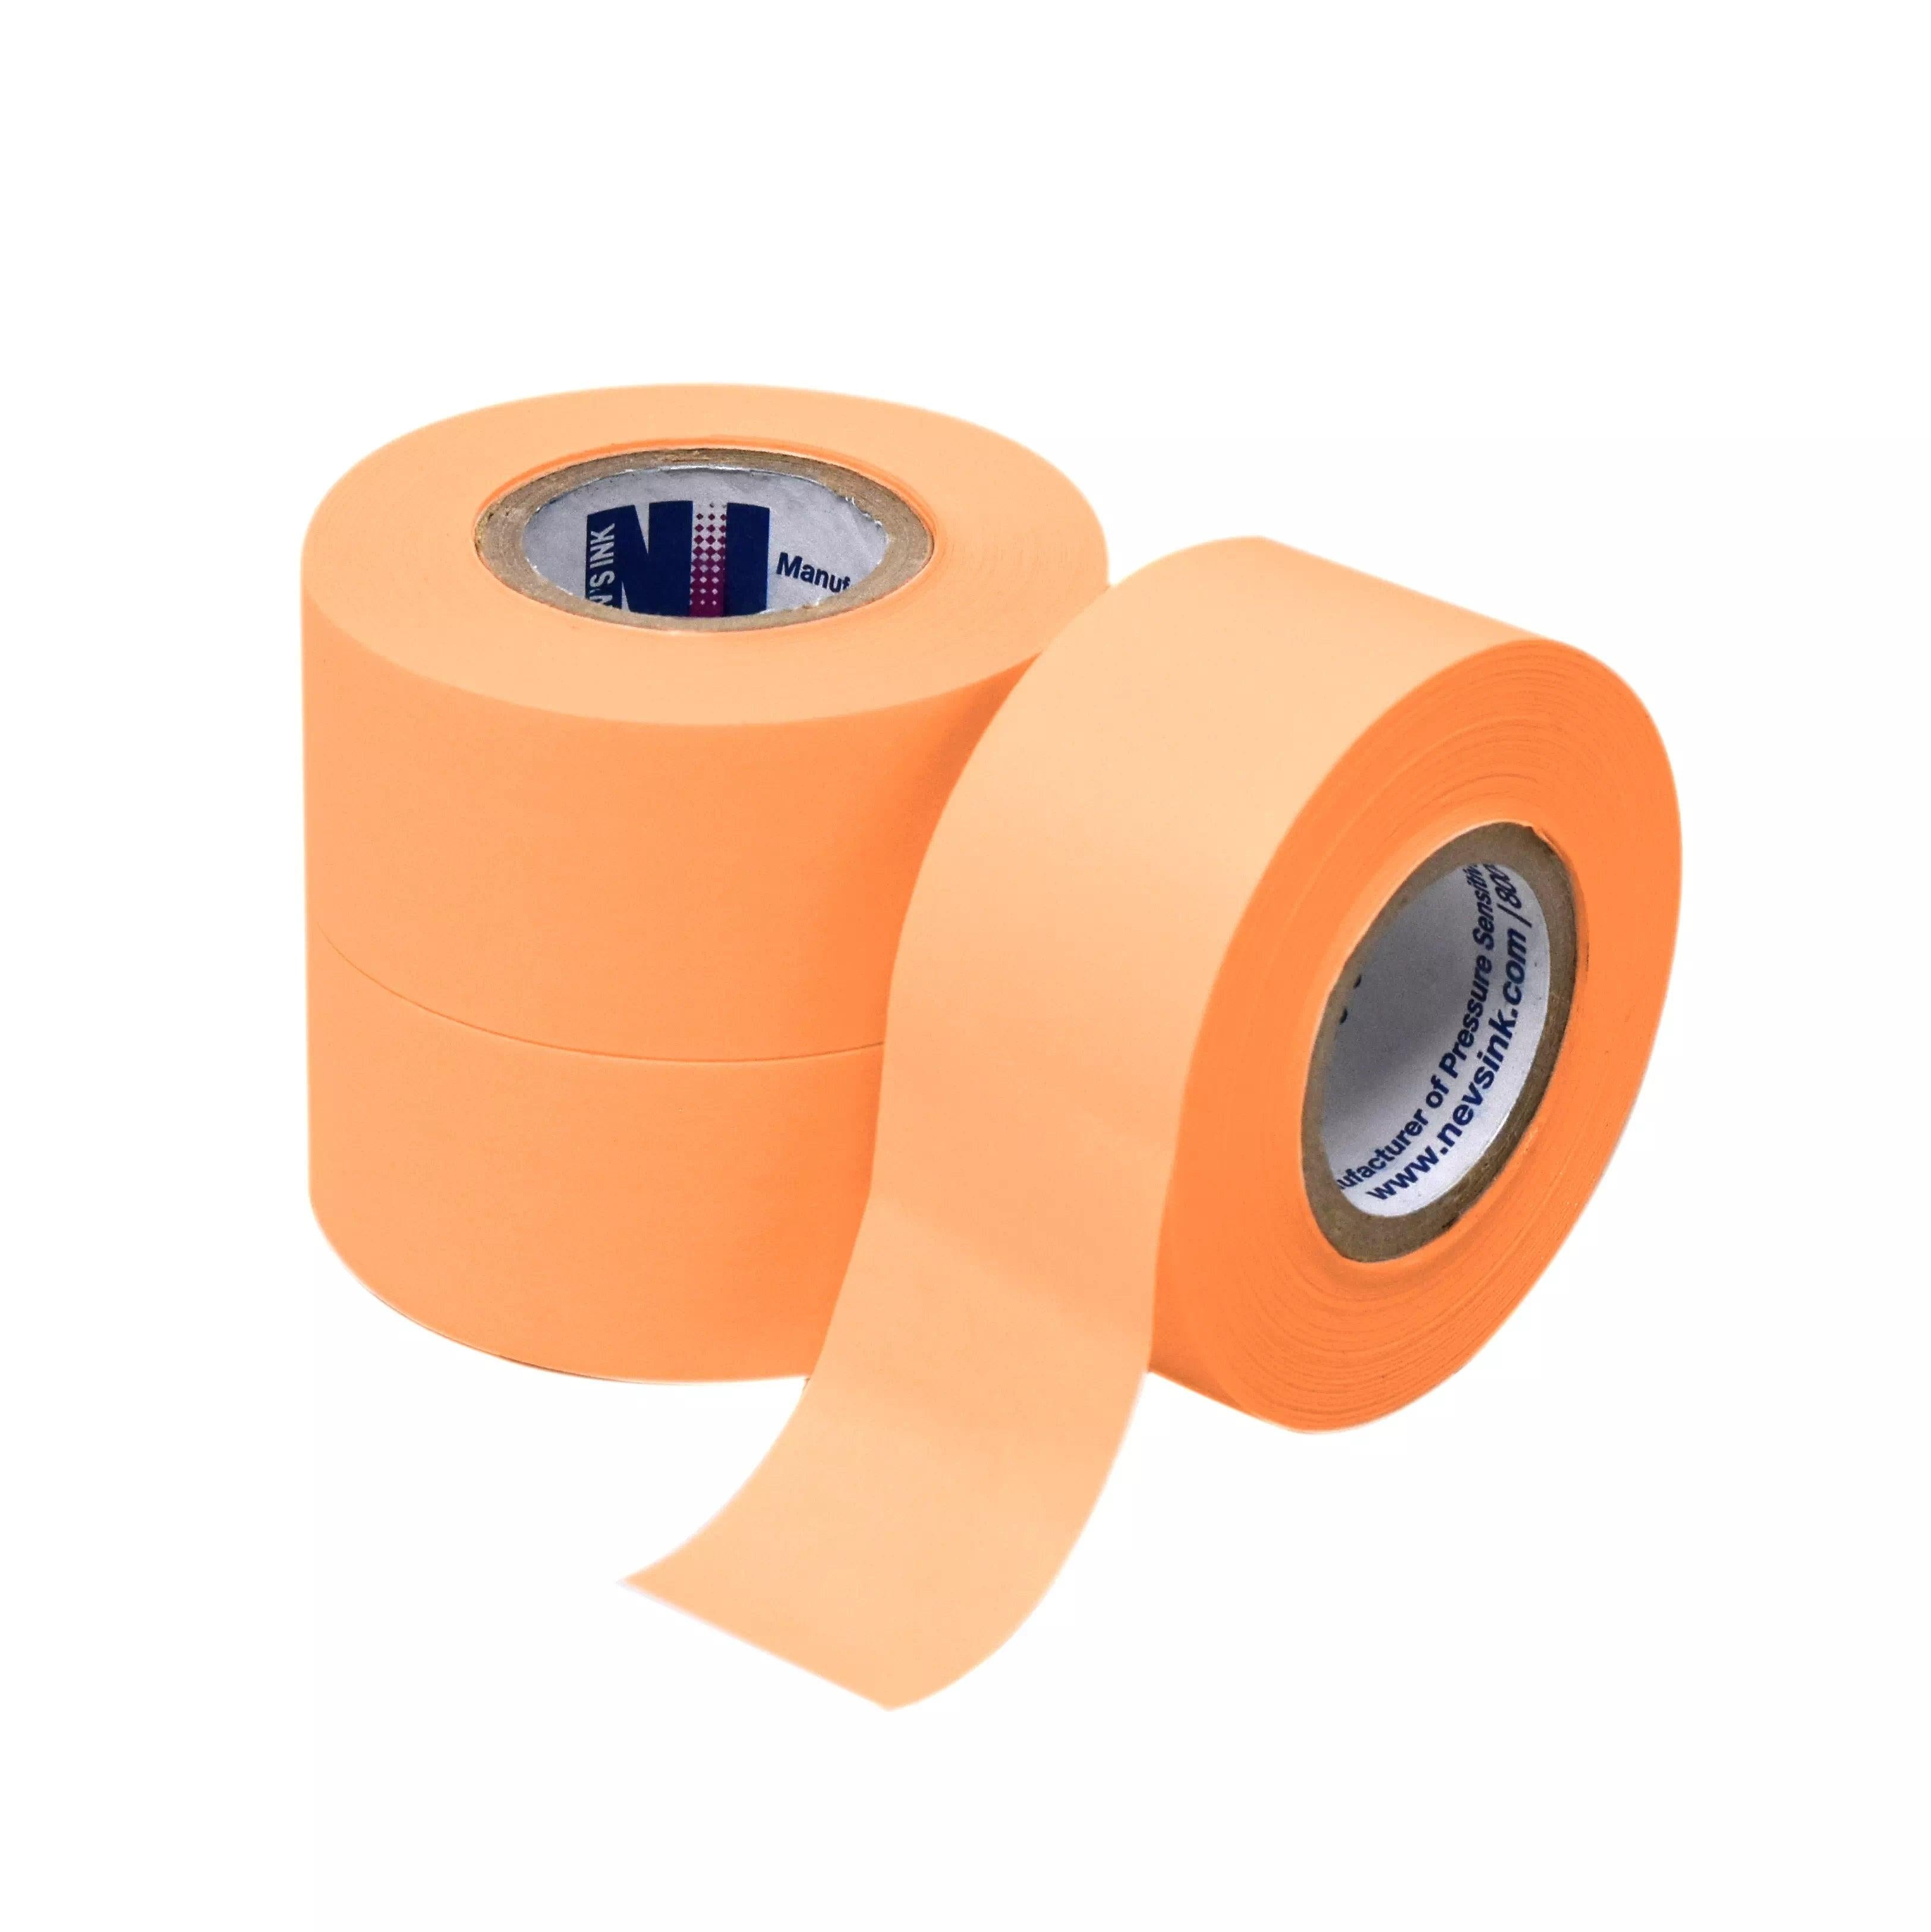 Orange Lab Labeling Tape, 500″ Length x 1″ Width, 1 Inch Core for Marking